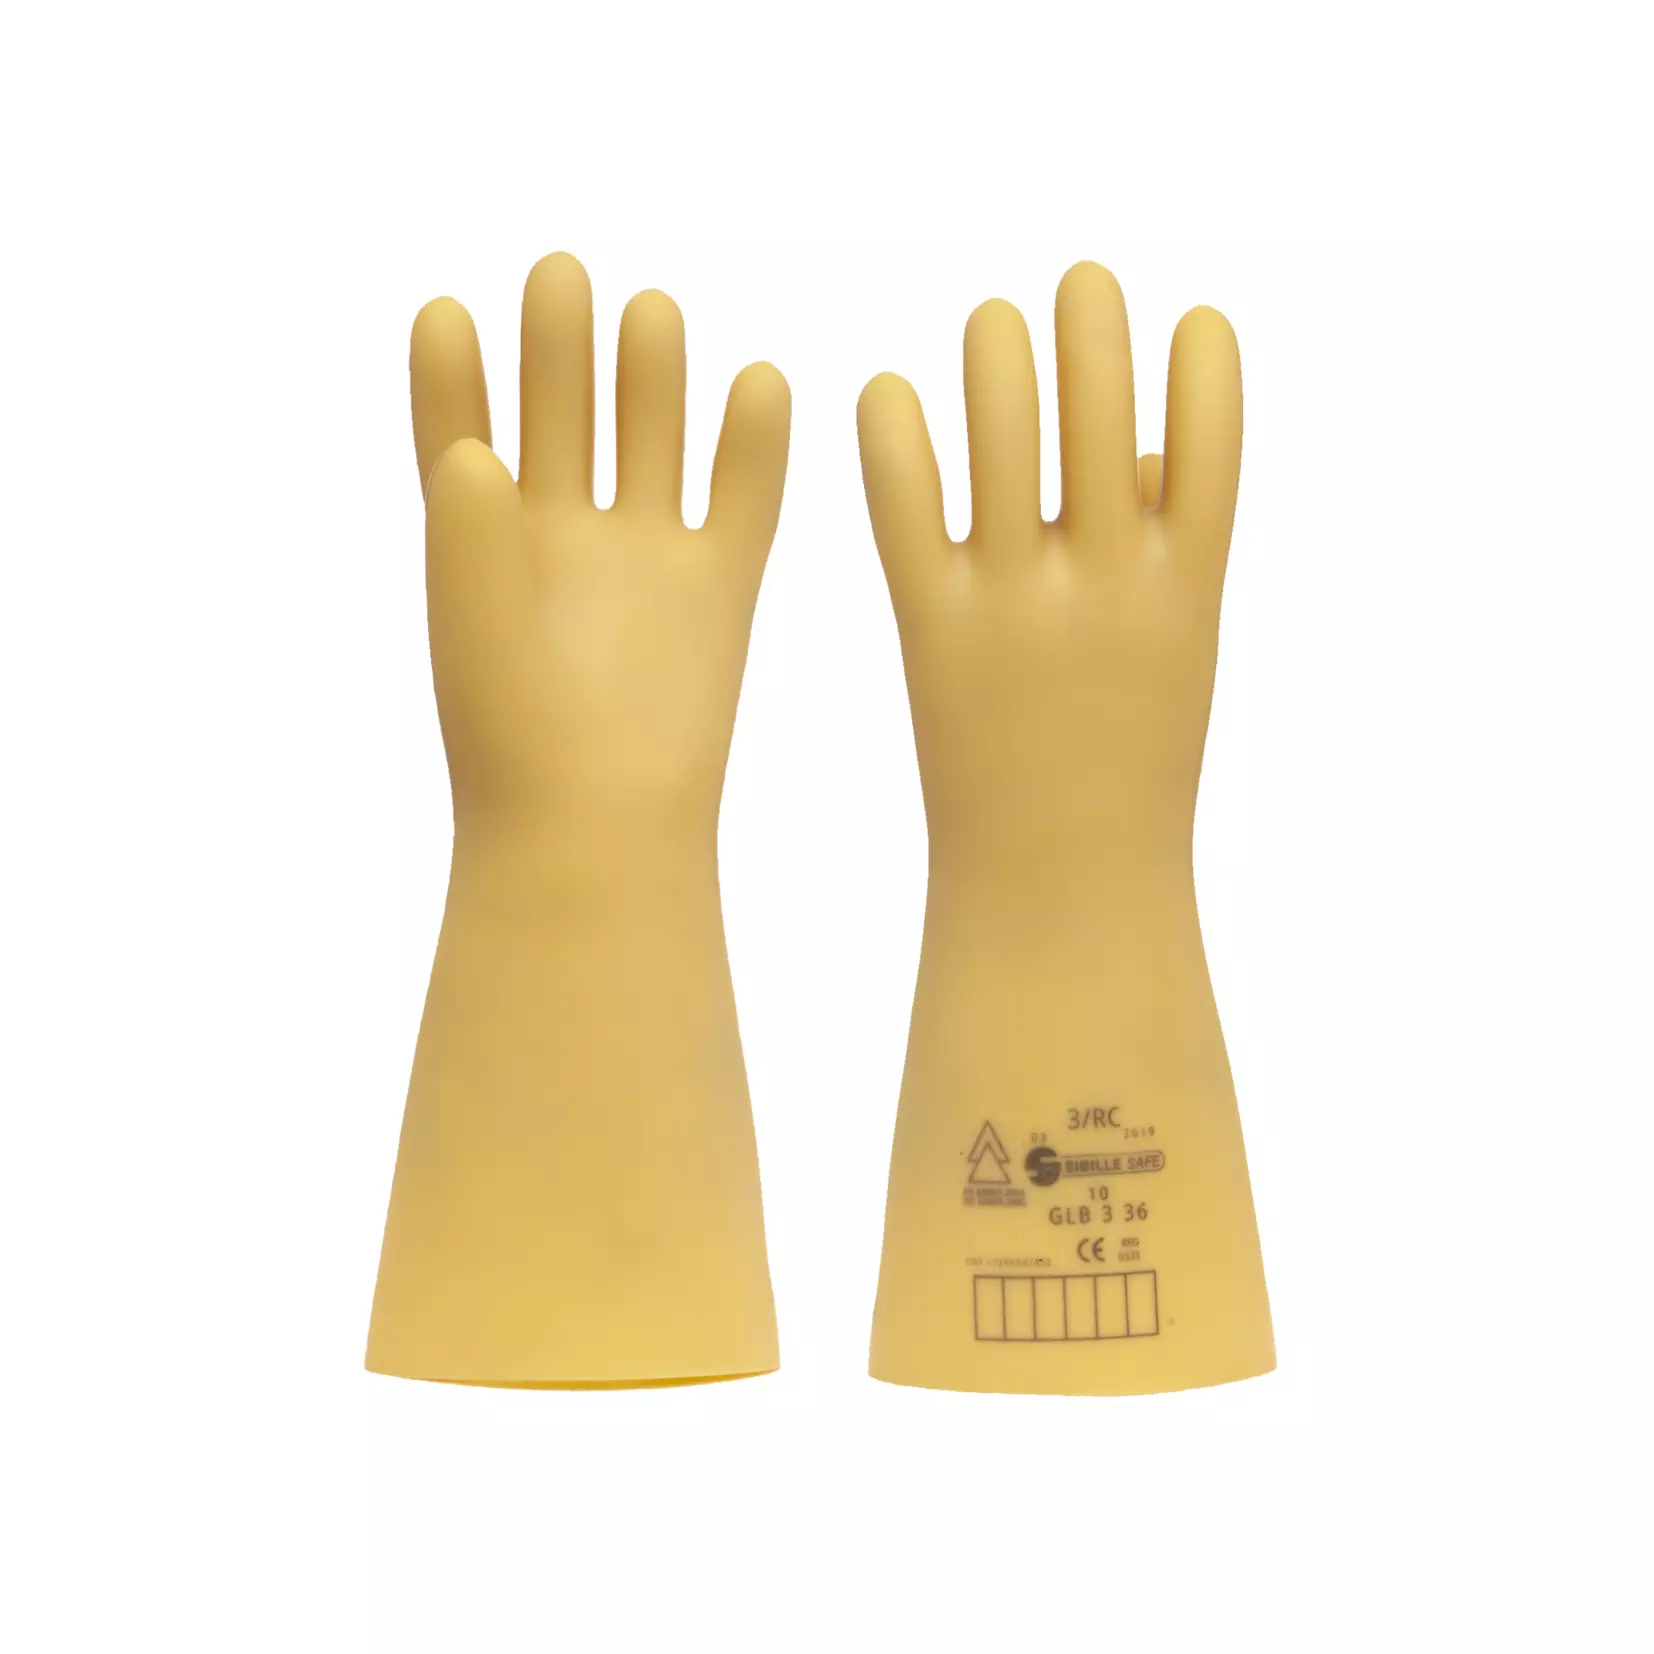 Sibille Class 00: tension work gloves